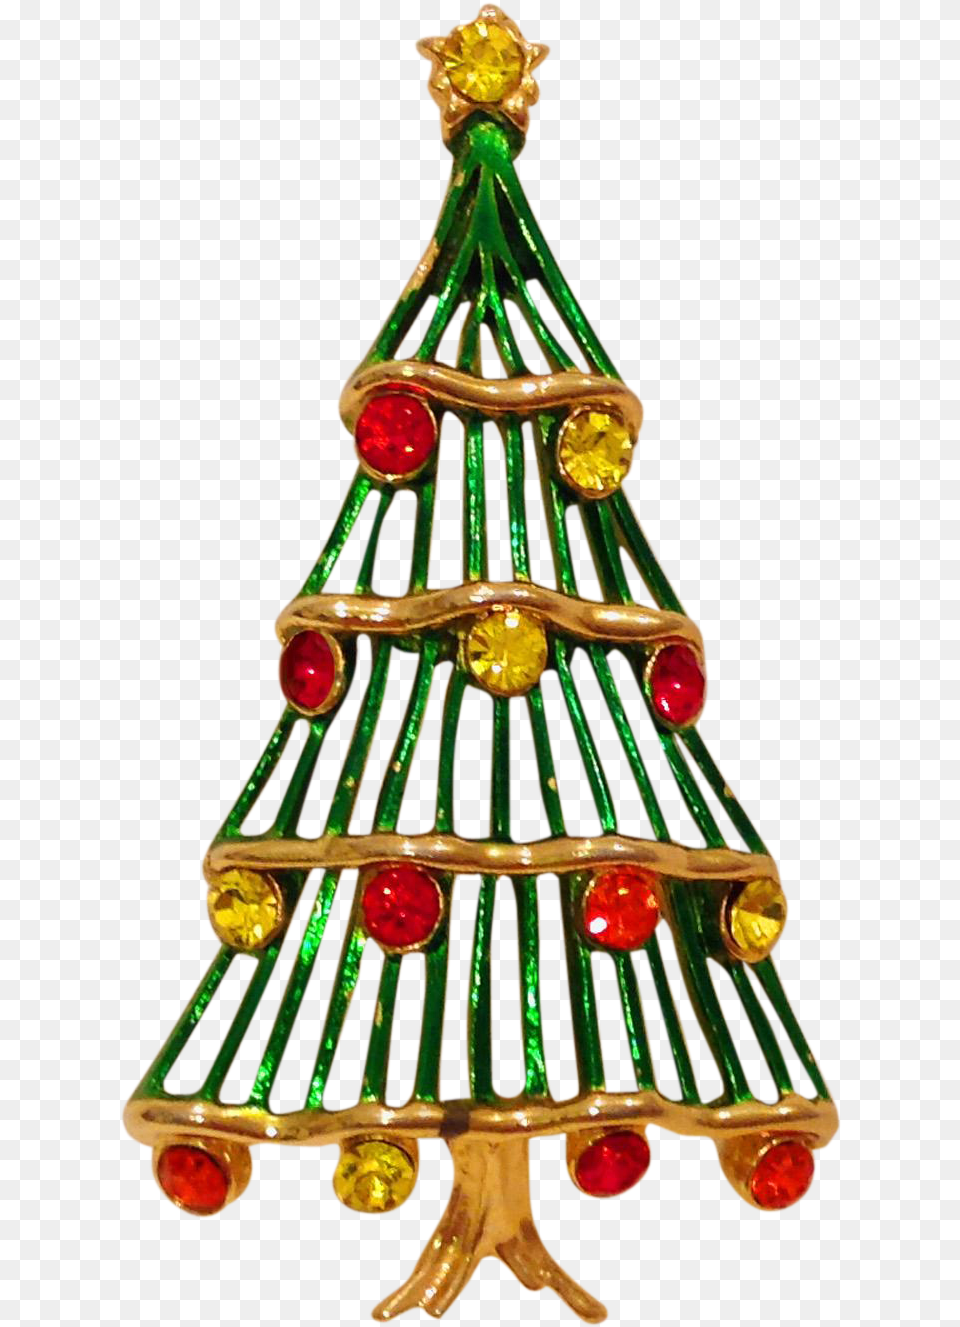 Vintage Christmas Tree Pins Lovely Christmas Tree Pin Christmas Tree, Festival, Christmas Decorations, Christmas Tree, Accessories Free Png Download